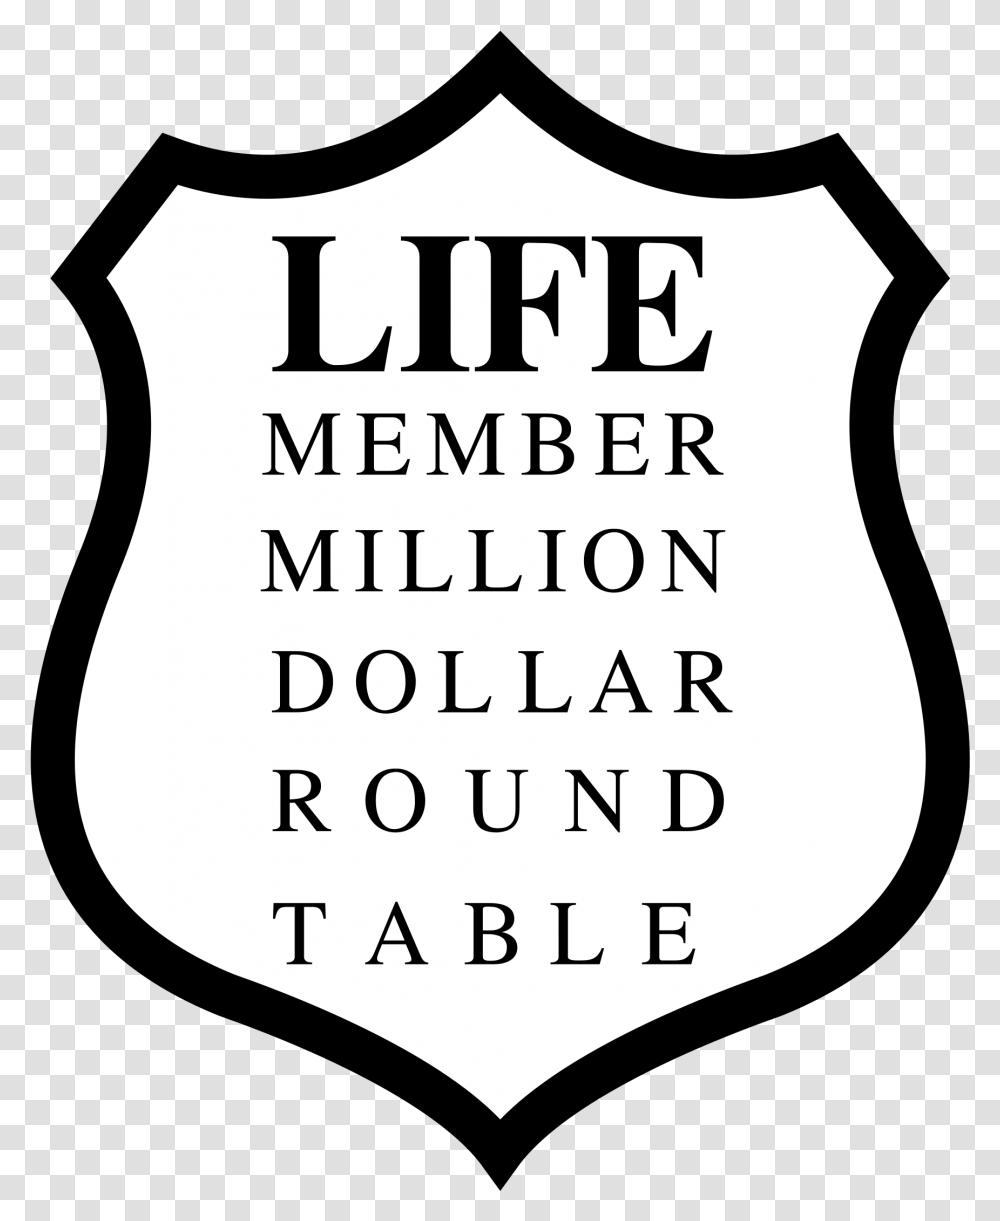 Million Dollar Round Table Logo Black And White Member Million Dollar Round Table, Armor, Shield Transparent Png